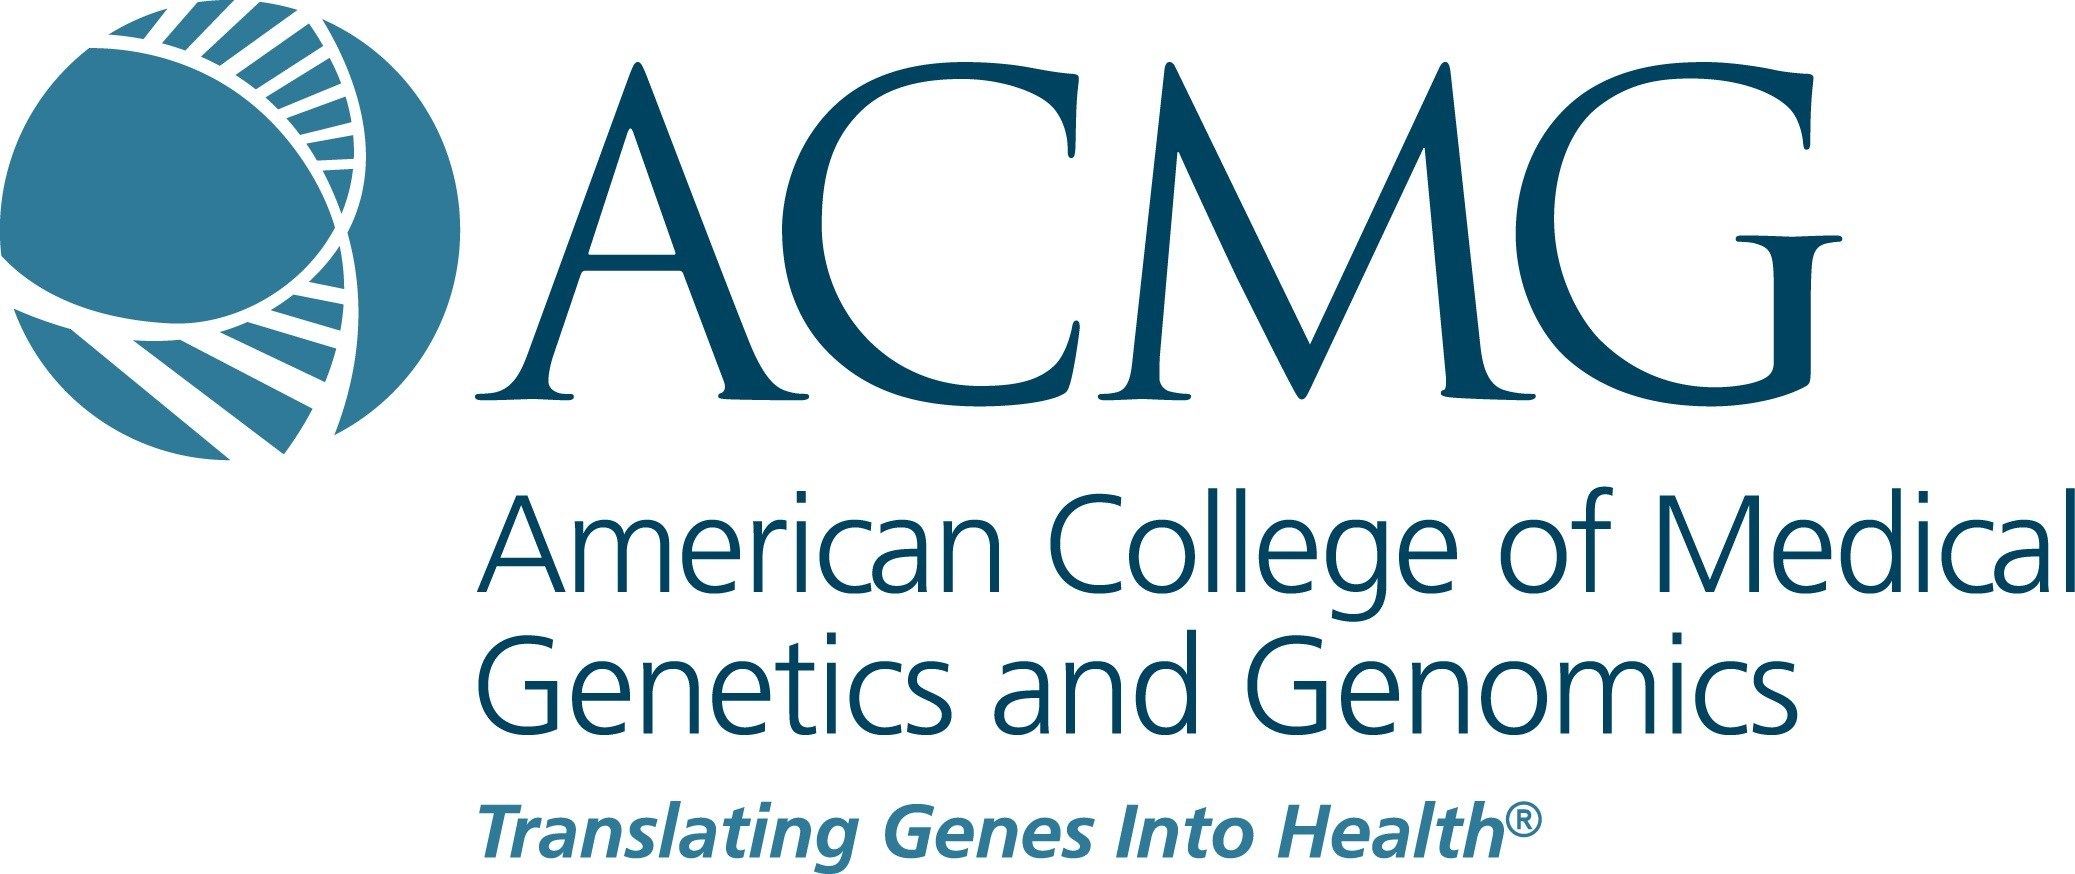 Medical Genetics Awareness Week Will Be Celebrated April 2-6, 2019: Efforts to Promote Awareness of Medical Genetics Field Launches This Year